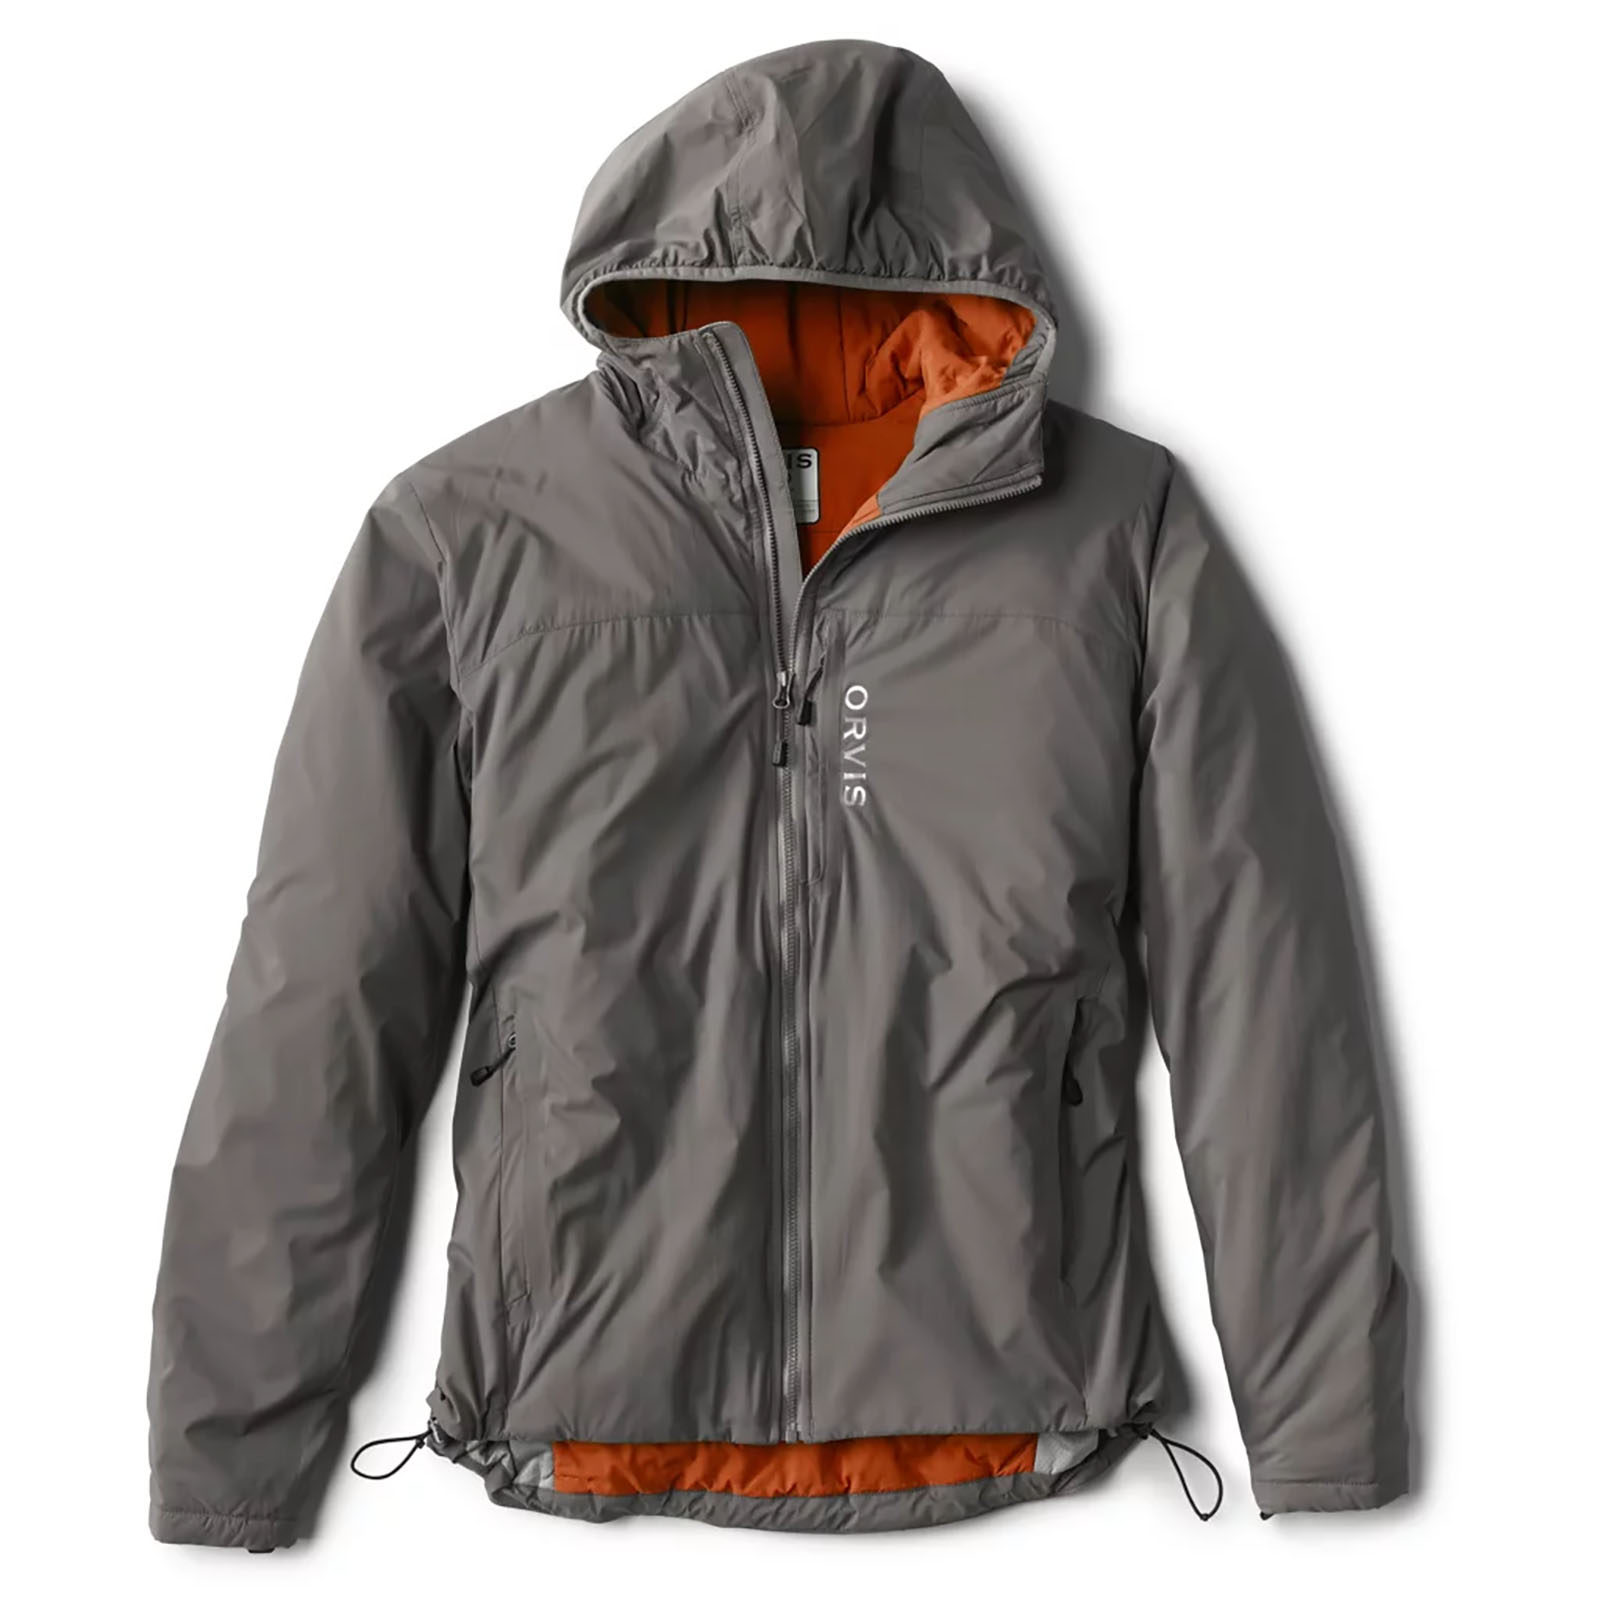 The Orvis Pro HD Insulated Hoodie Is My Go-To Jacket for Subzero